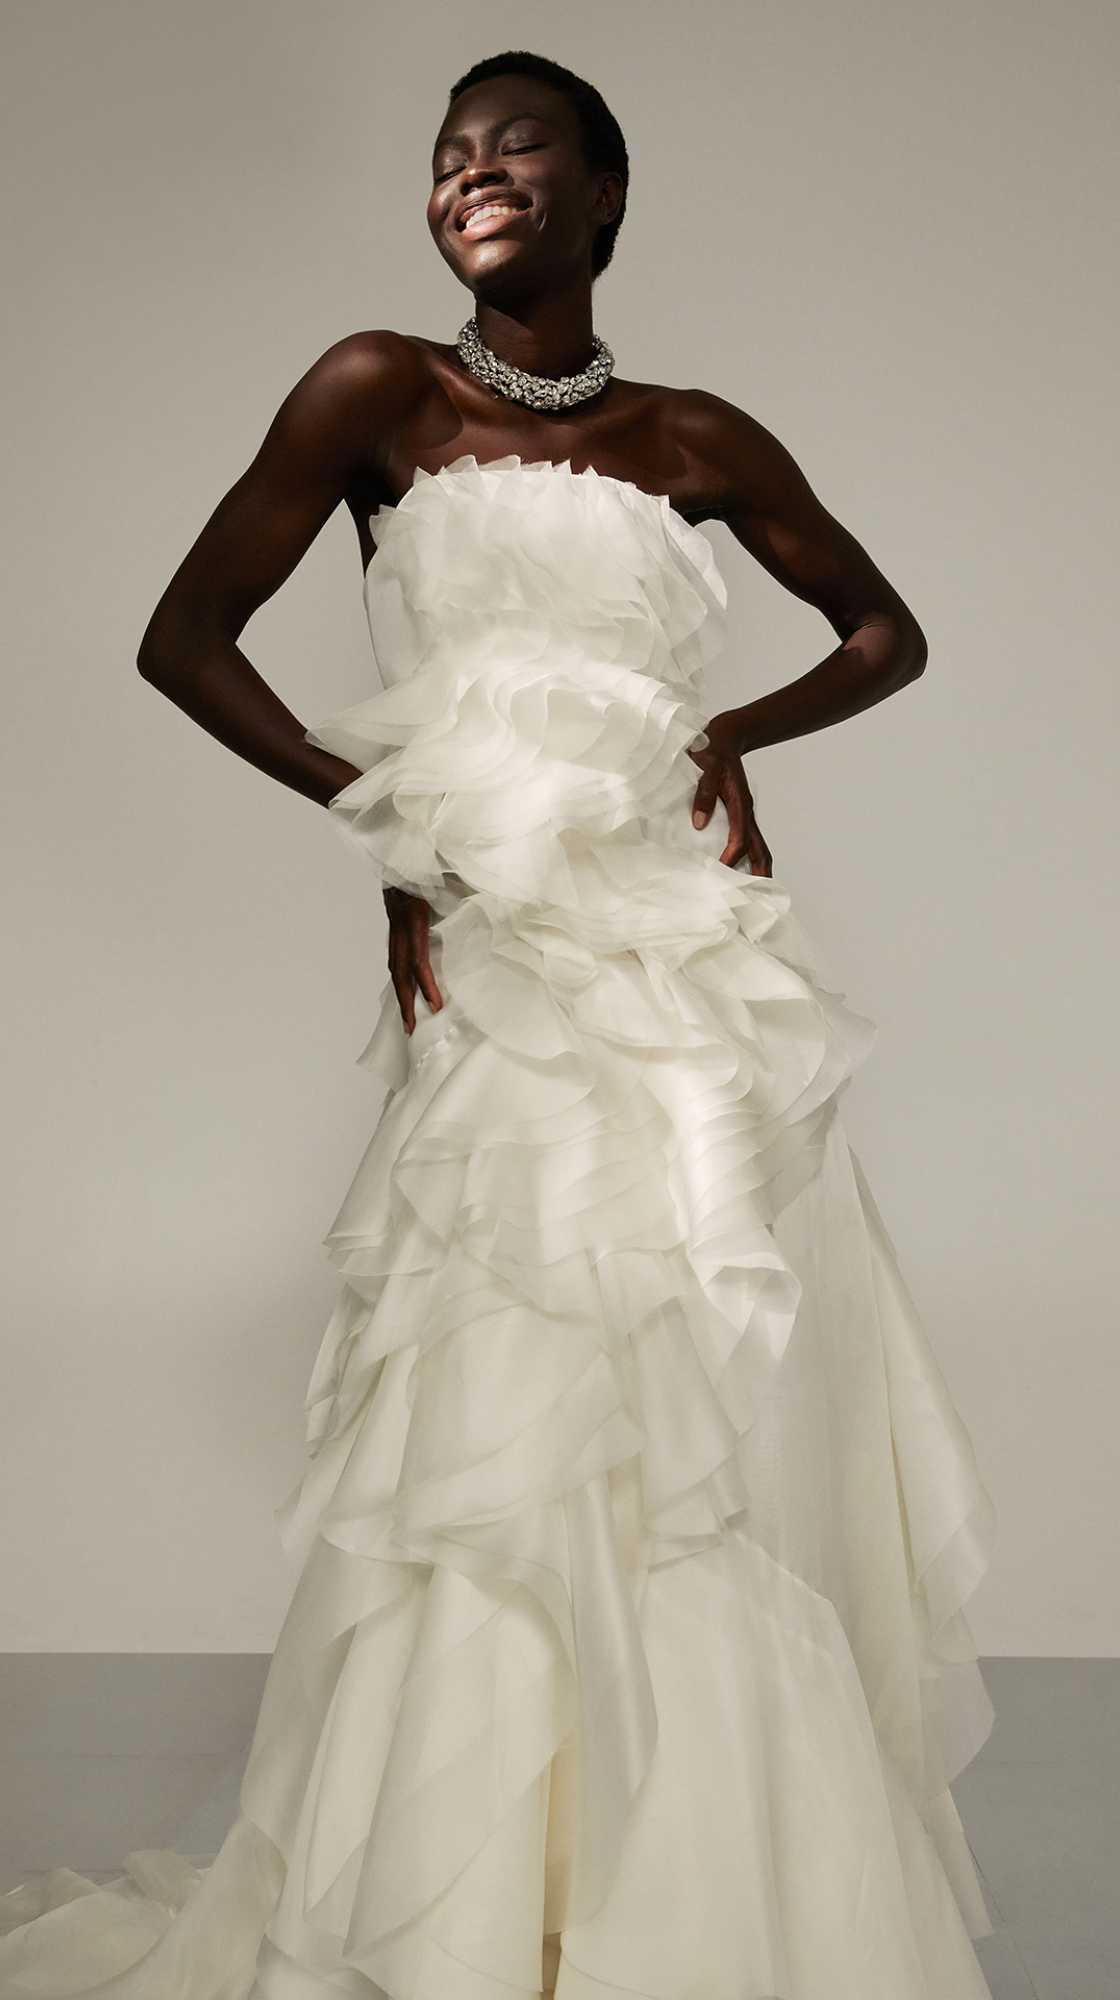 Wavy Bloom Corsage dress from Kaviar Gauche's 2022 collection